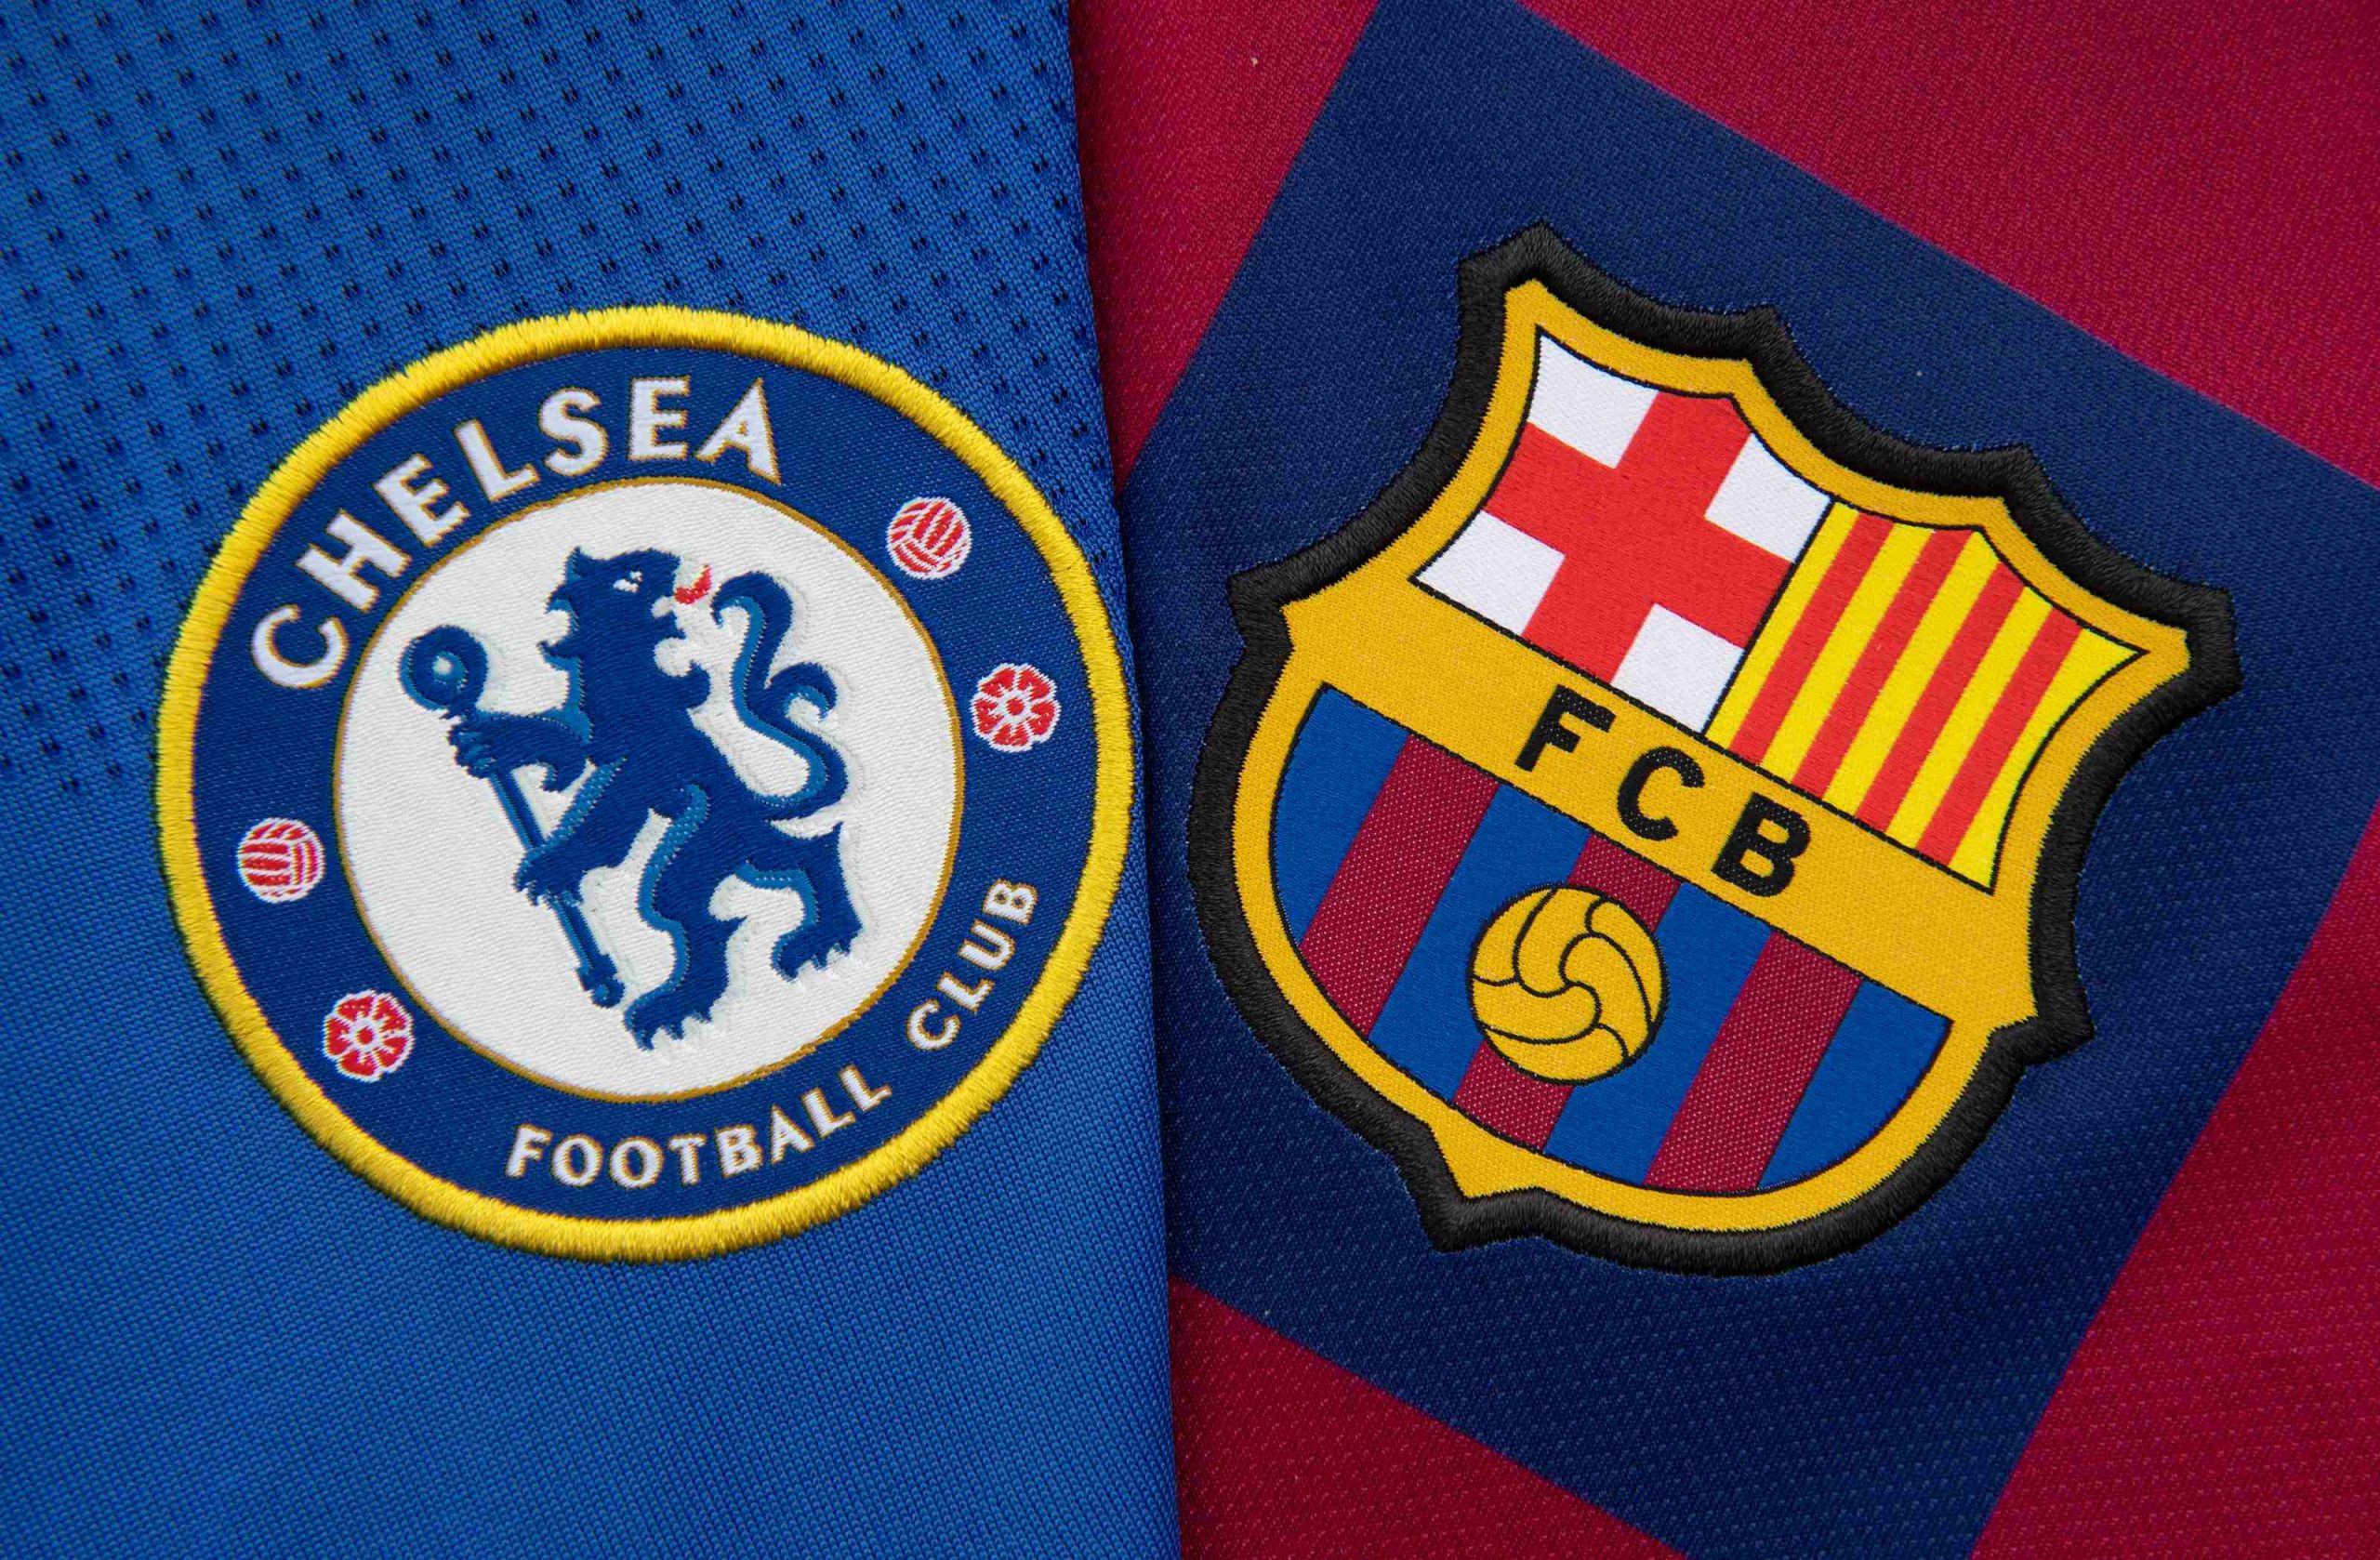 Latest Barcelona News: Barcelona Is Prepared To Sell The First team Player; Chelsea Want Him